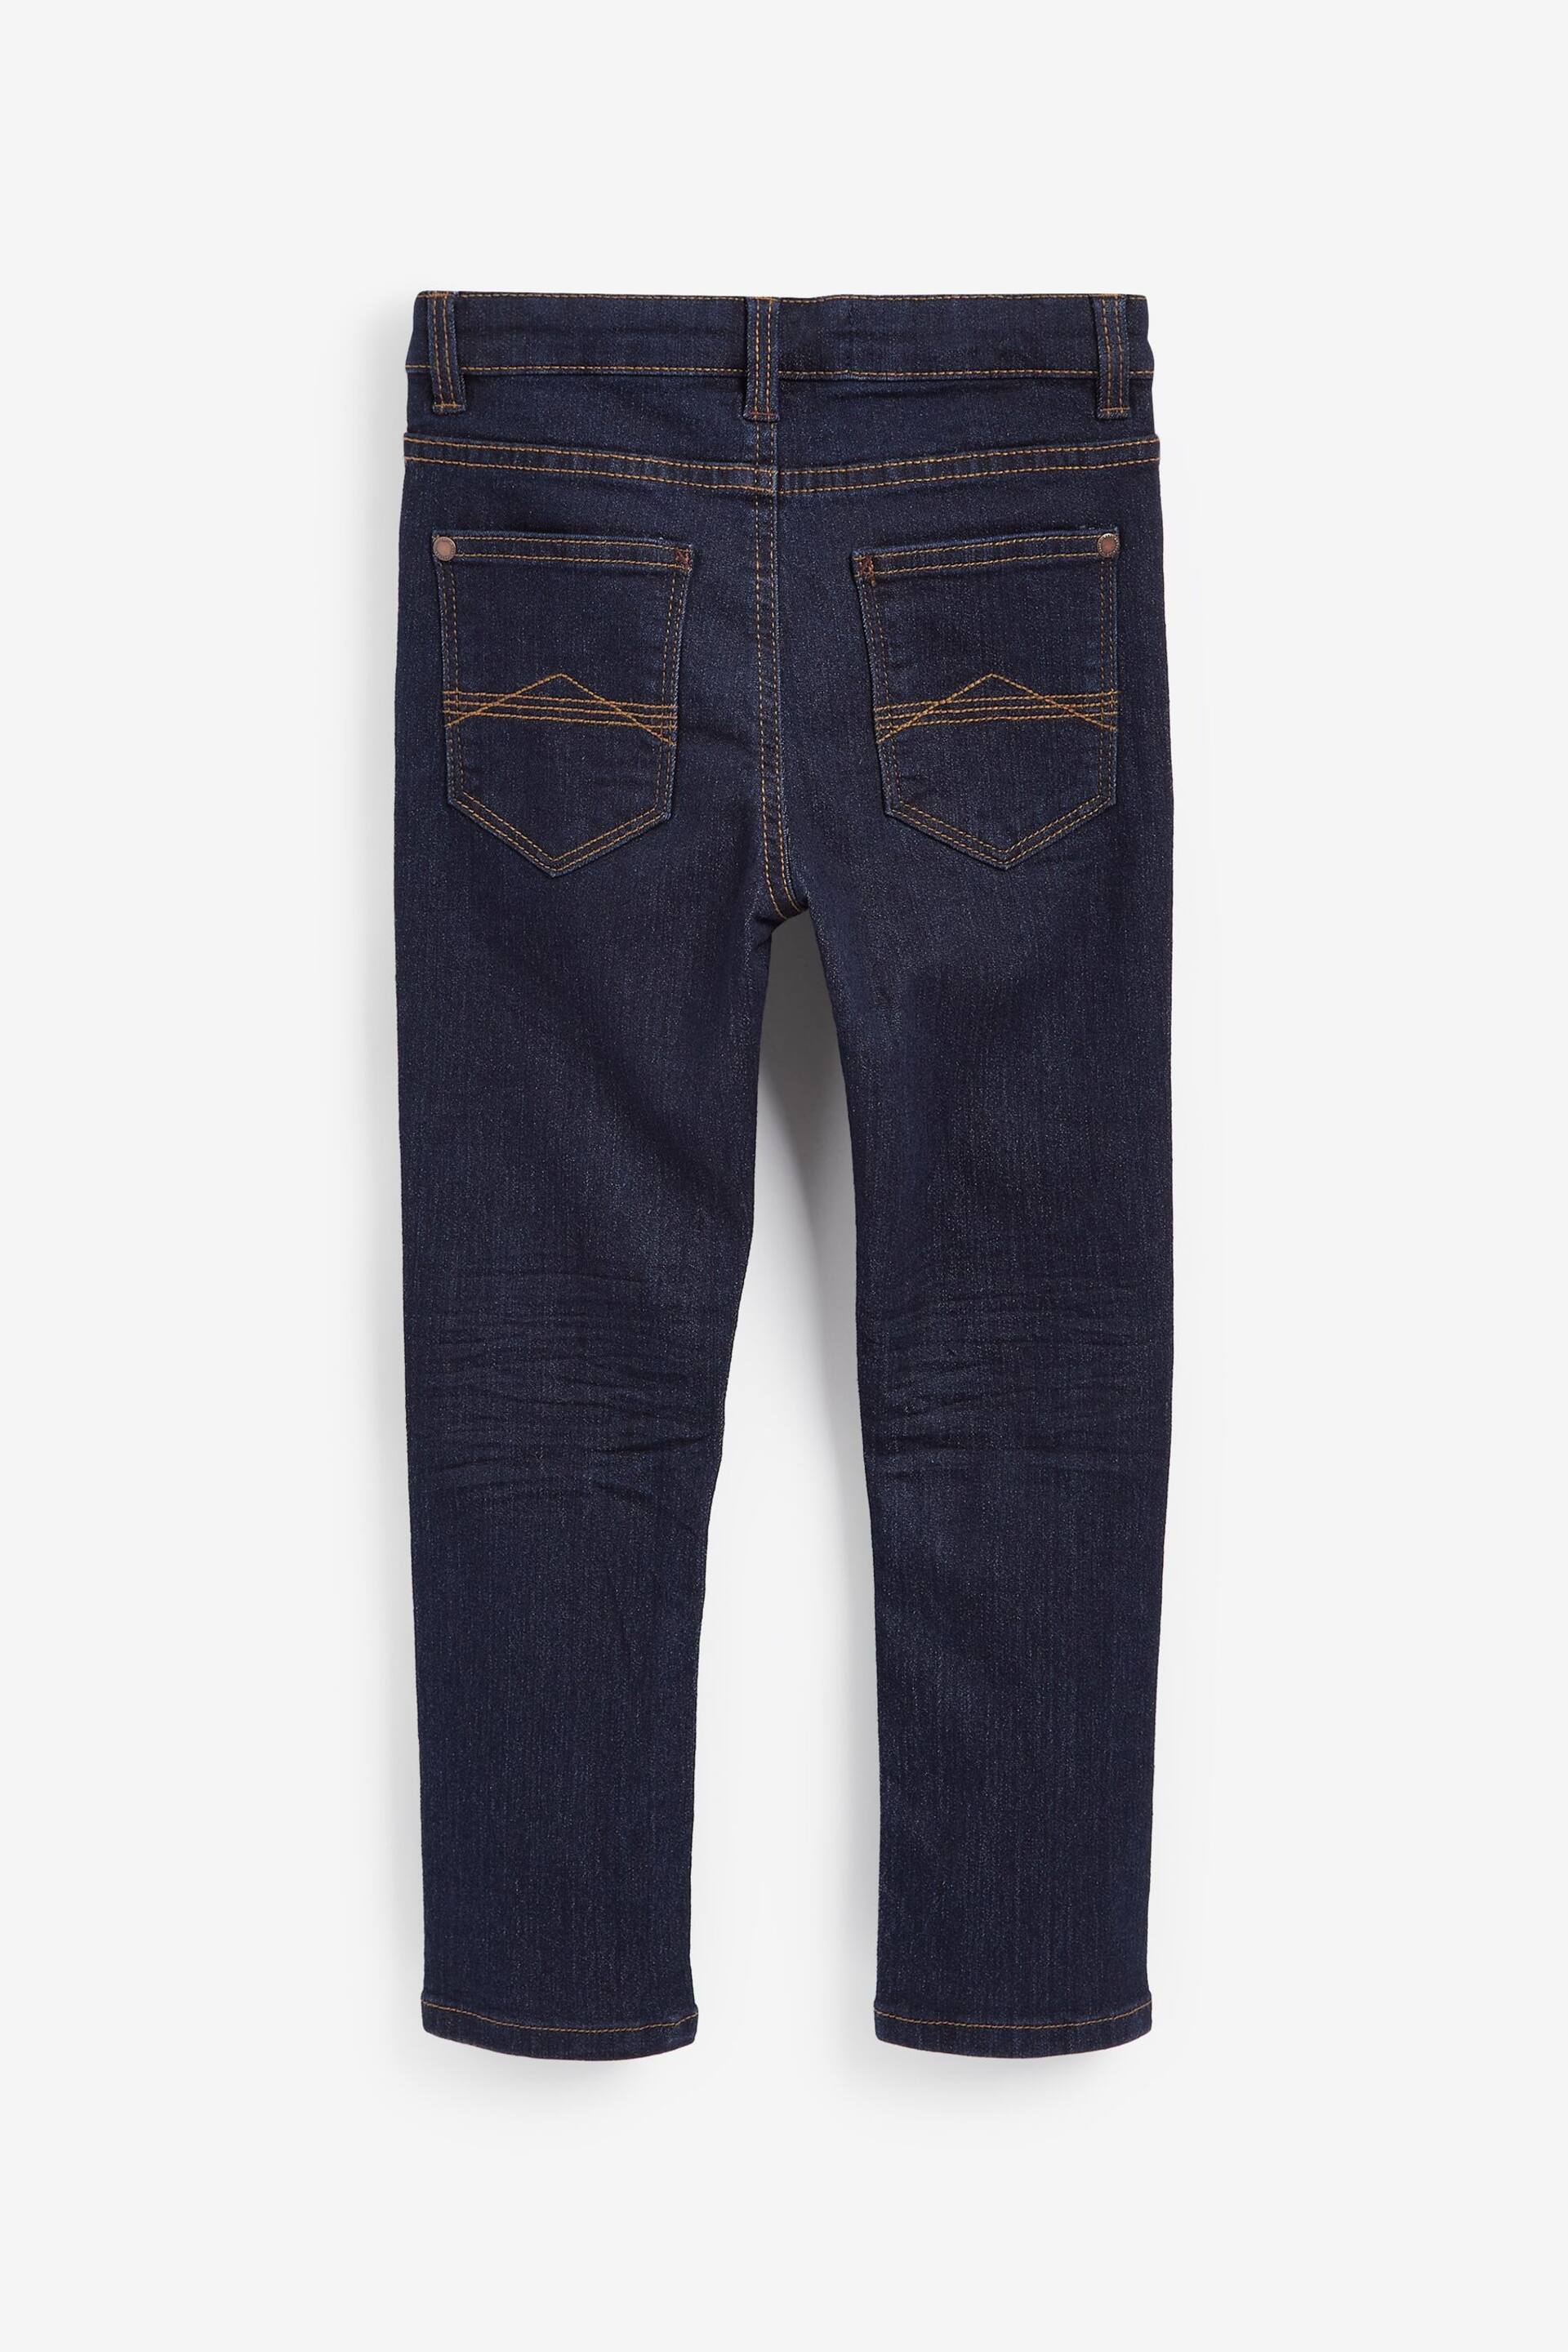 Blue Dark Skinny Fit Cotton Rich Stretch Jeans (3-17yrs) - Image 2 of 3